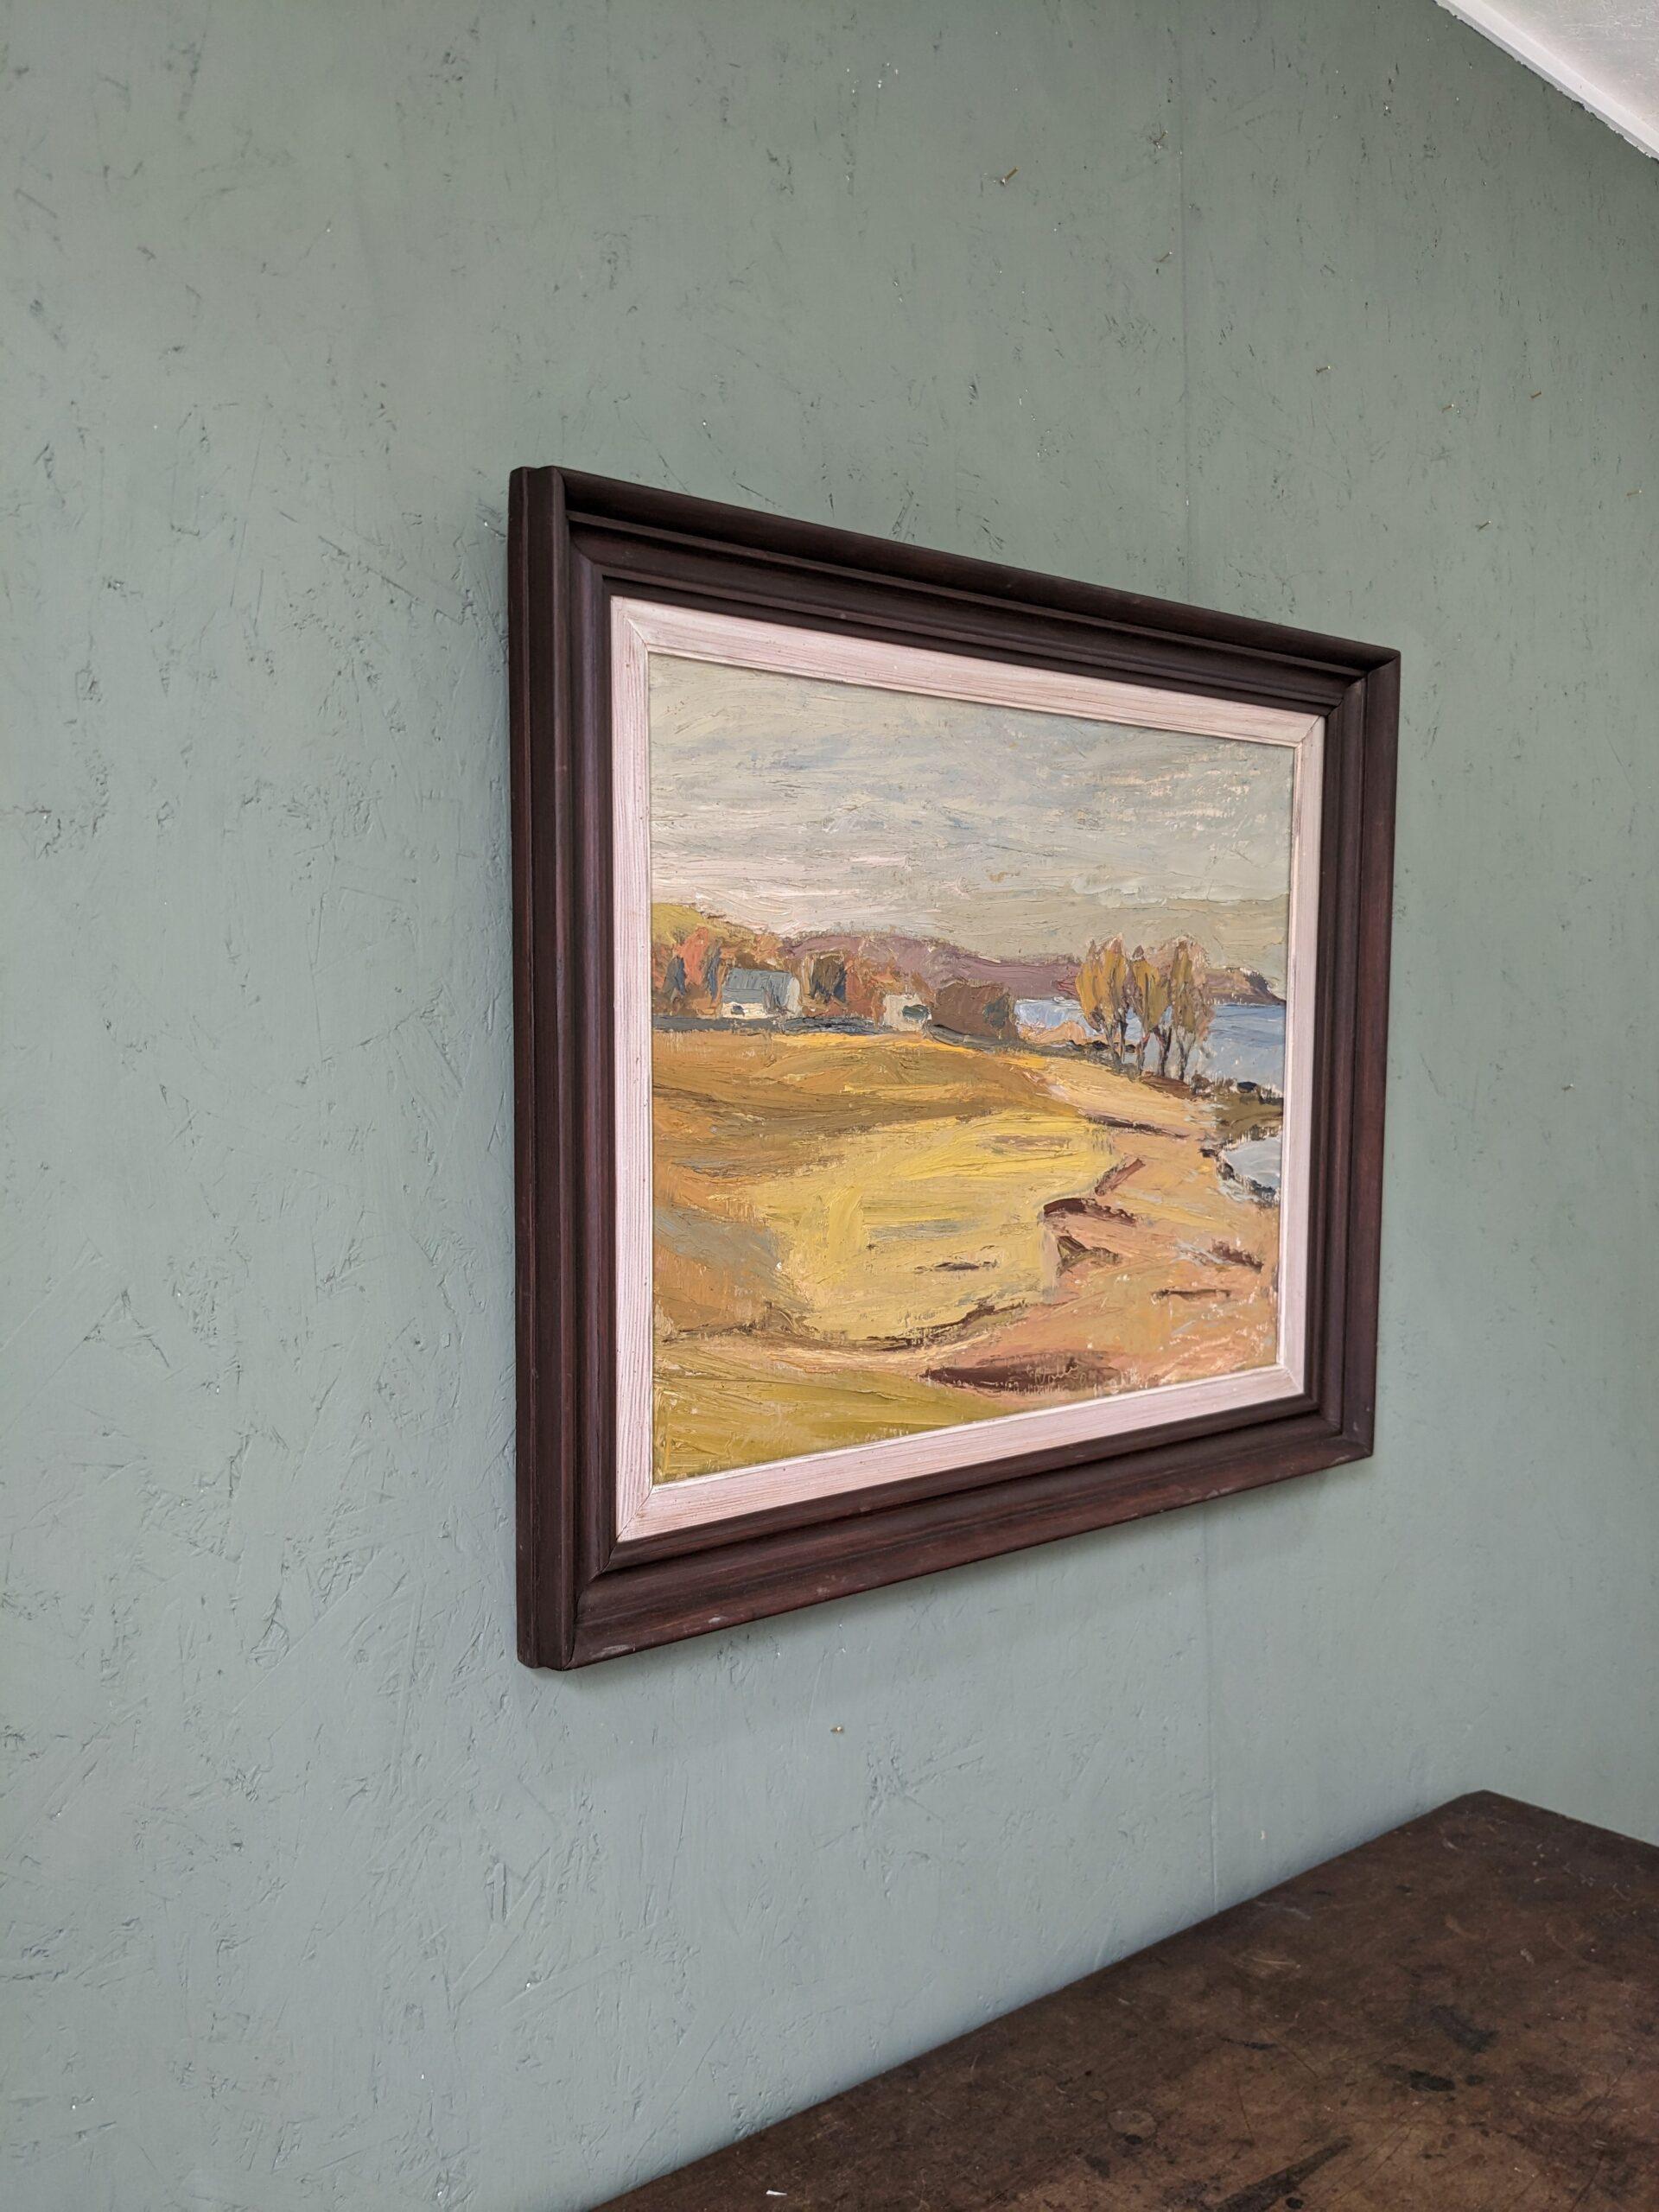 GOLDEN MEADOWS
Size: 58 x 70 cm (including frame)
Oil on board

An large and alluring textured modernist coastal landscape composition, executed in oil onto board and dated 1950.

The artwork presents a beautiful view of a vast yellow meadow and